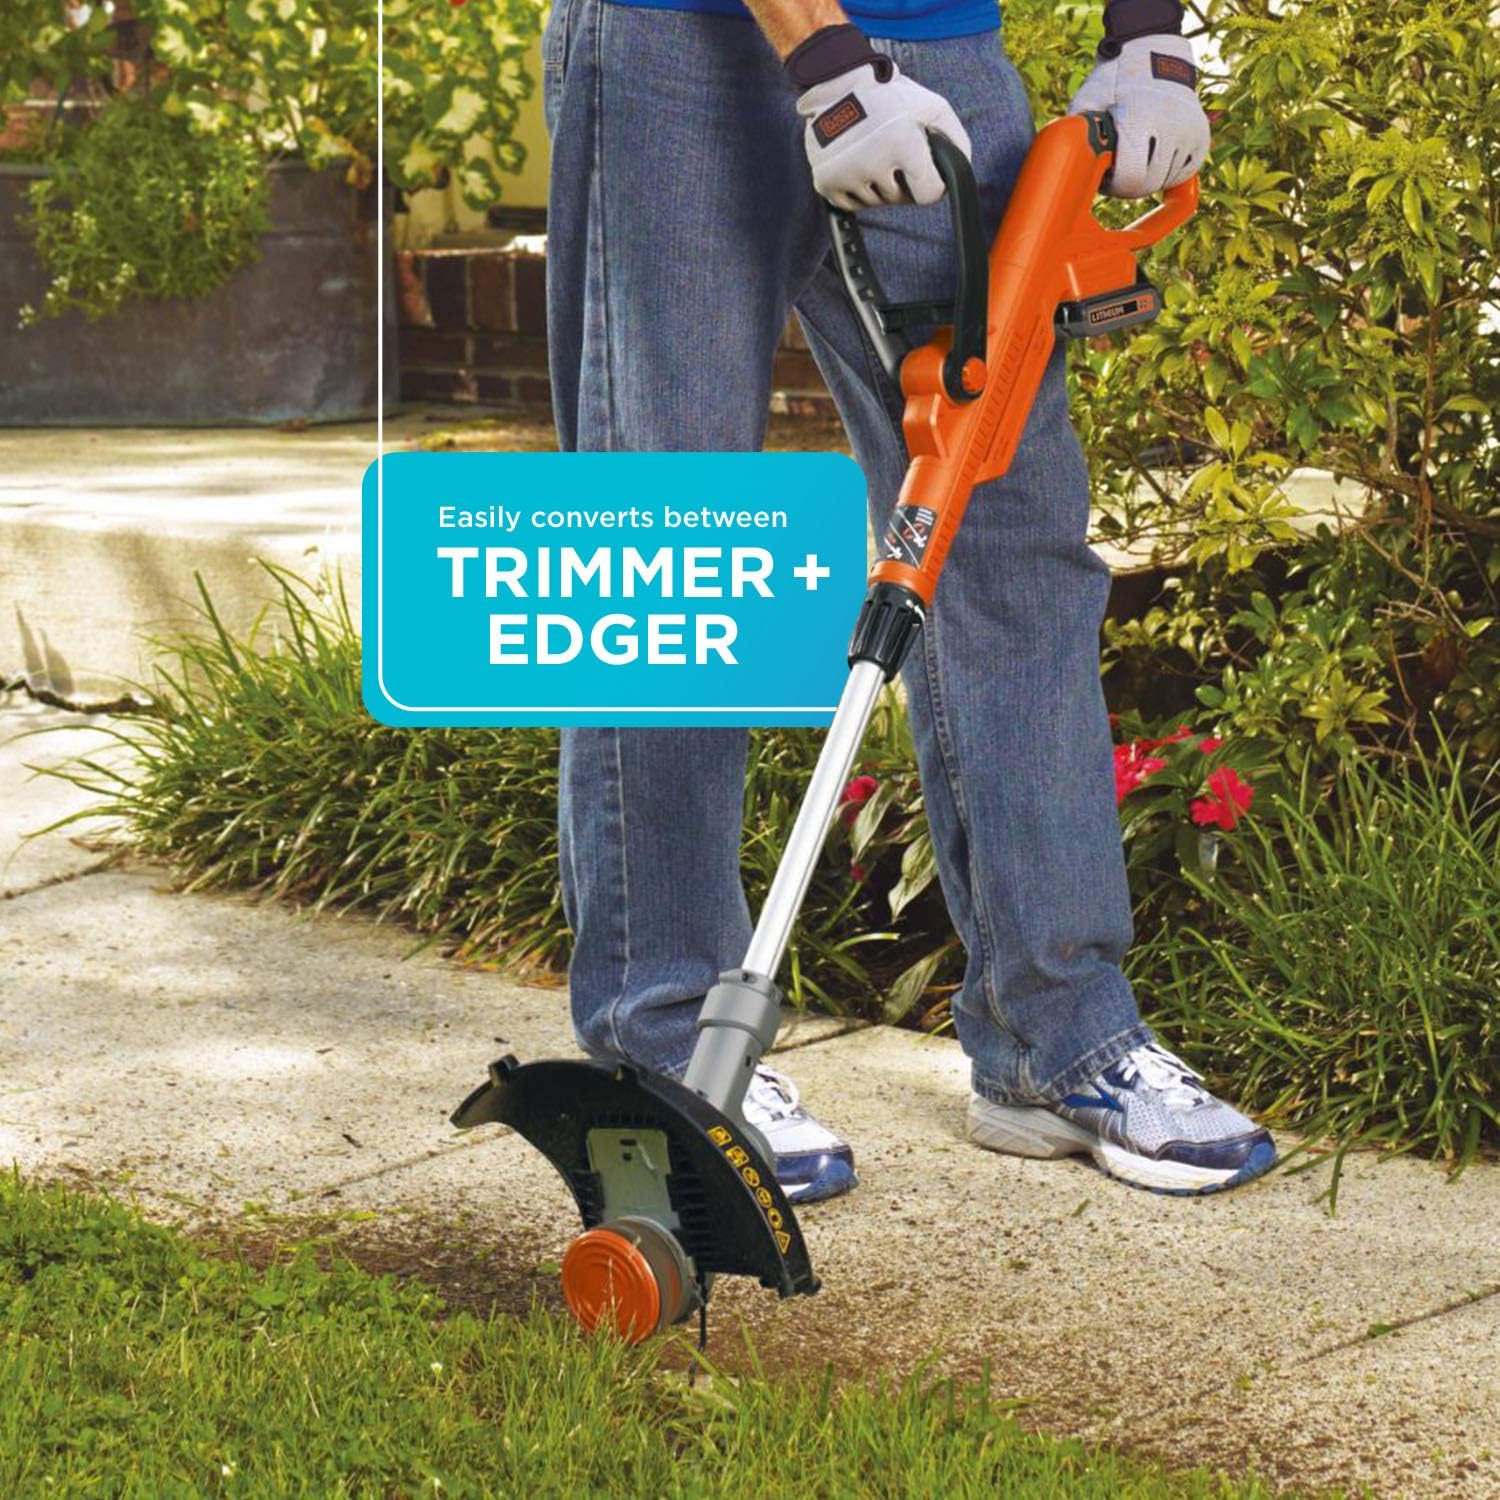 20V Max* Powerconnect 10 In. 2In1 Cordless String Trimmer/Edger + Sweeper  Combo Kit